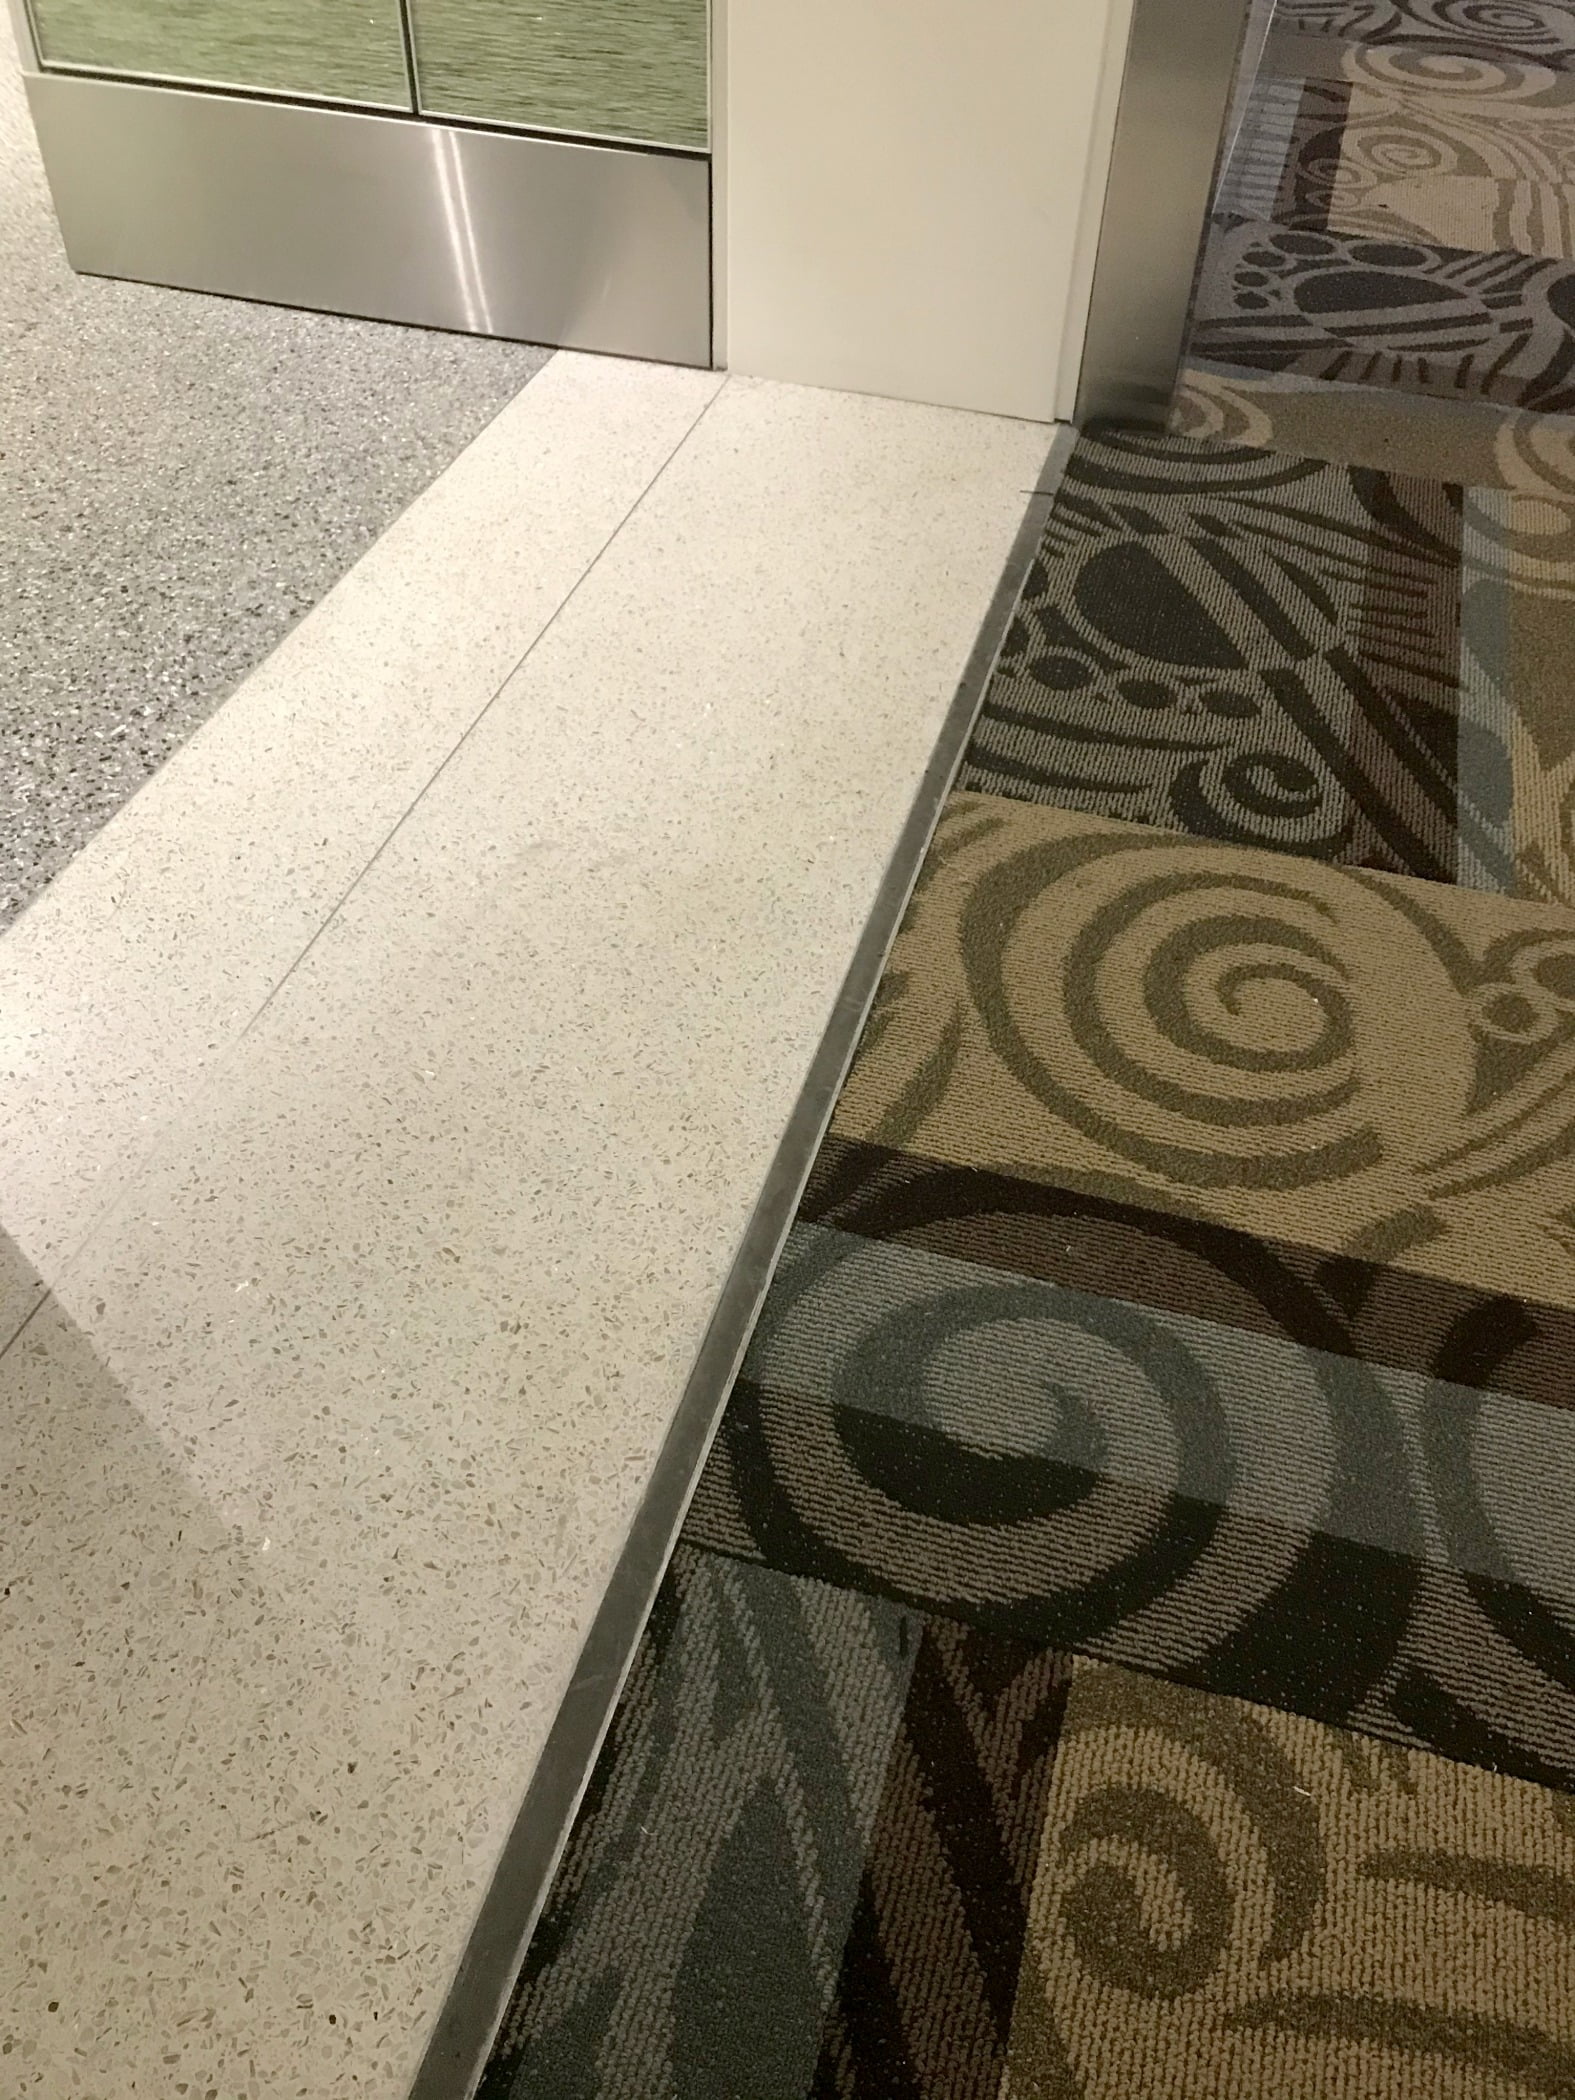 Balco floor pan expansion joint cover and flush mounted wall and ceiling expansion joint covers create a seamless transition and coordinated aesthetic in the Baggage Claim area at the new BNA Vision addition of the Nashville International Airport in Nashville, Tennessee.